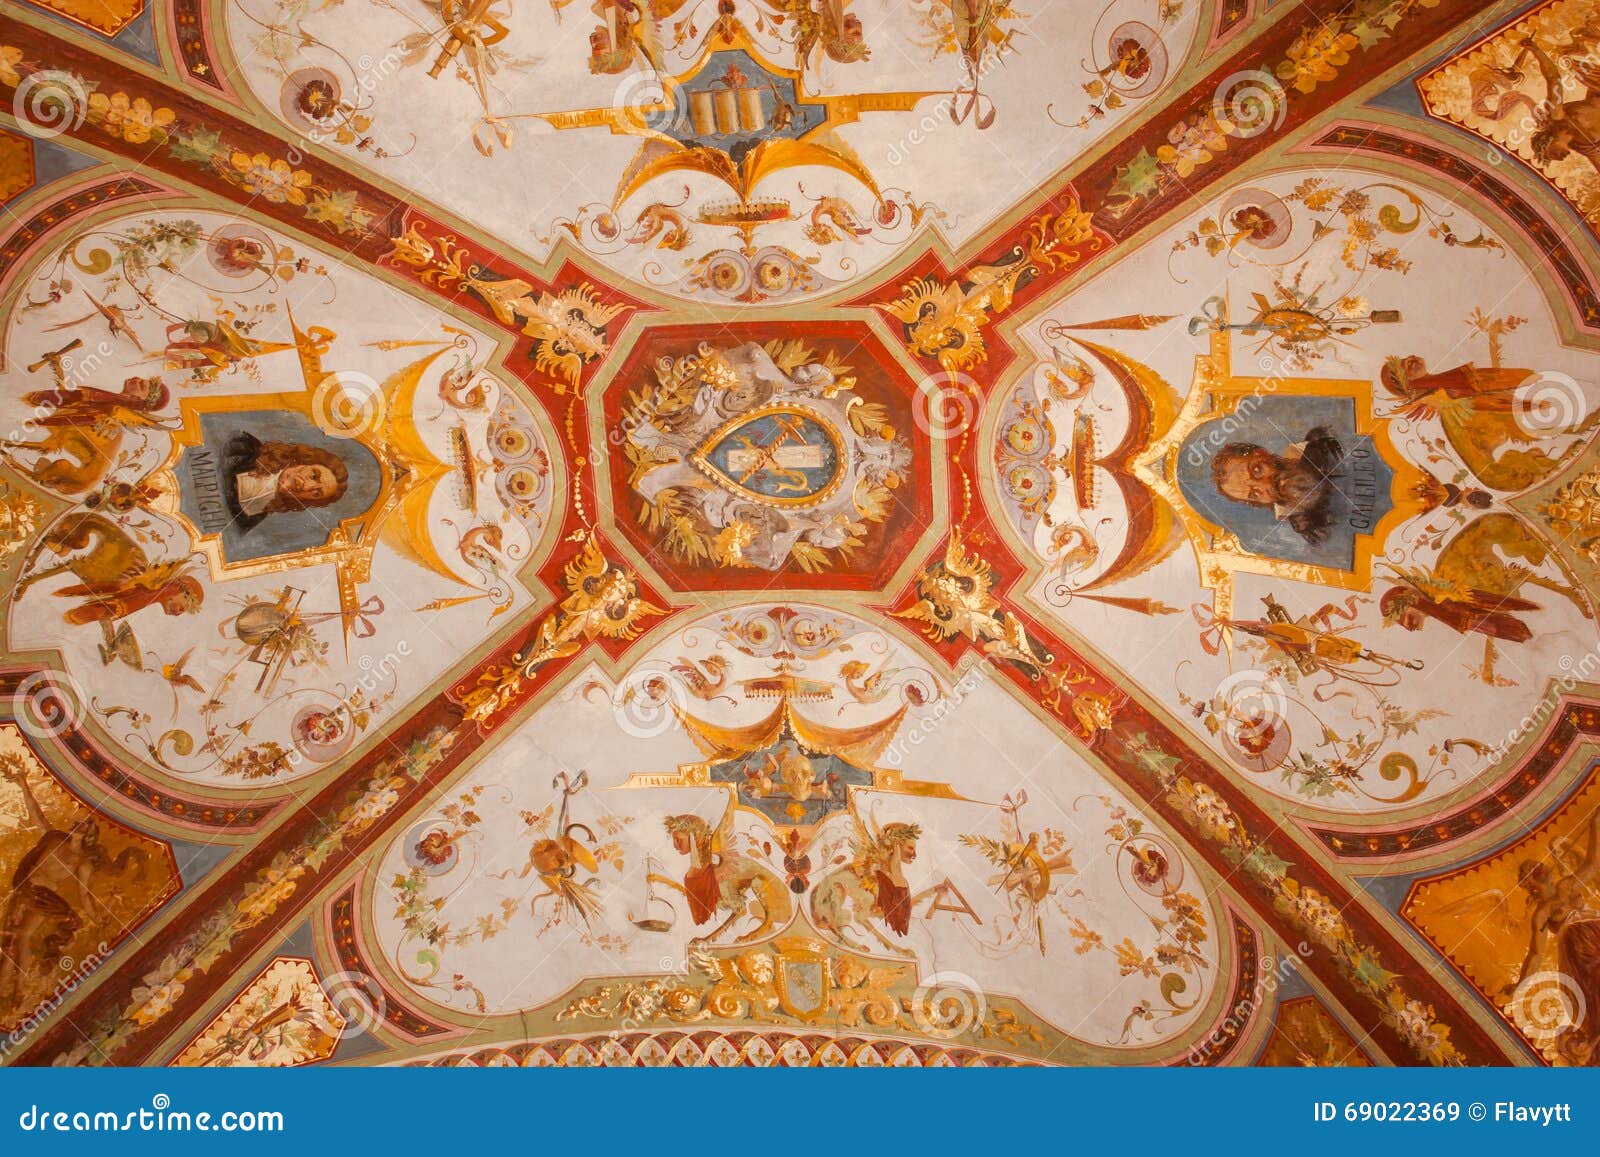 Painted Ceilings Of Famous Bologna Arcades In Italy Stock